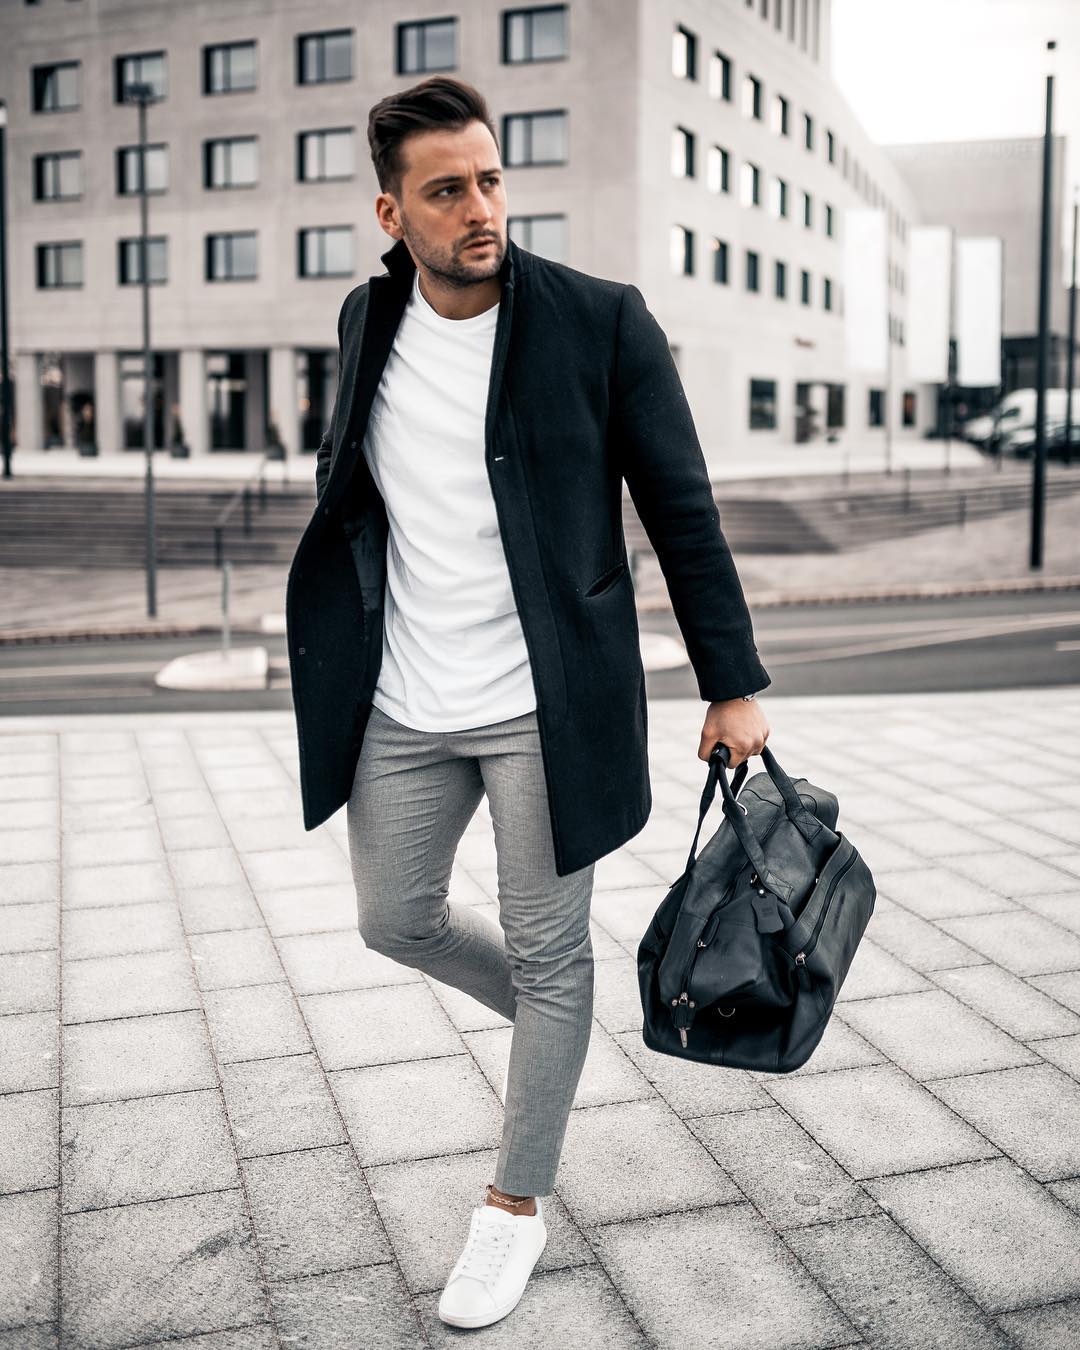 5 Coolest Outfits You Can Steal To Look Great – LIFESTYLE BY PS